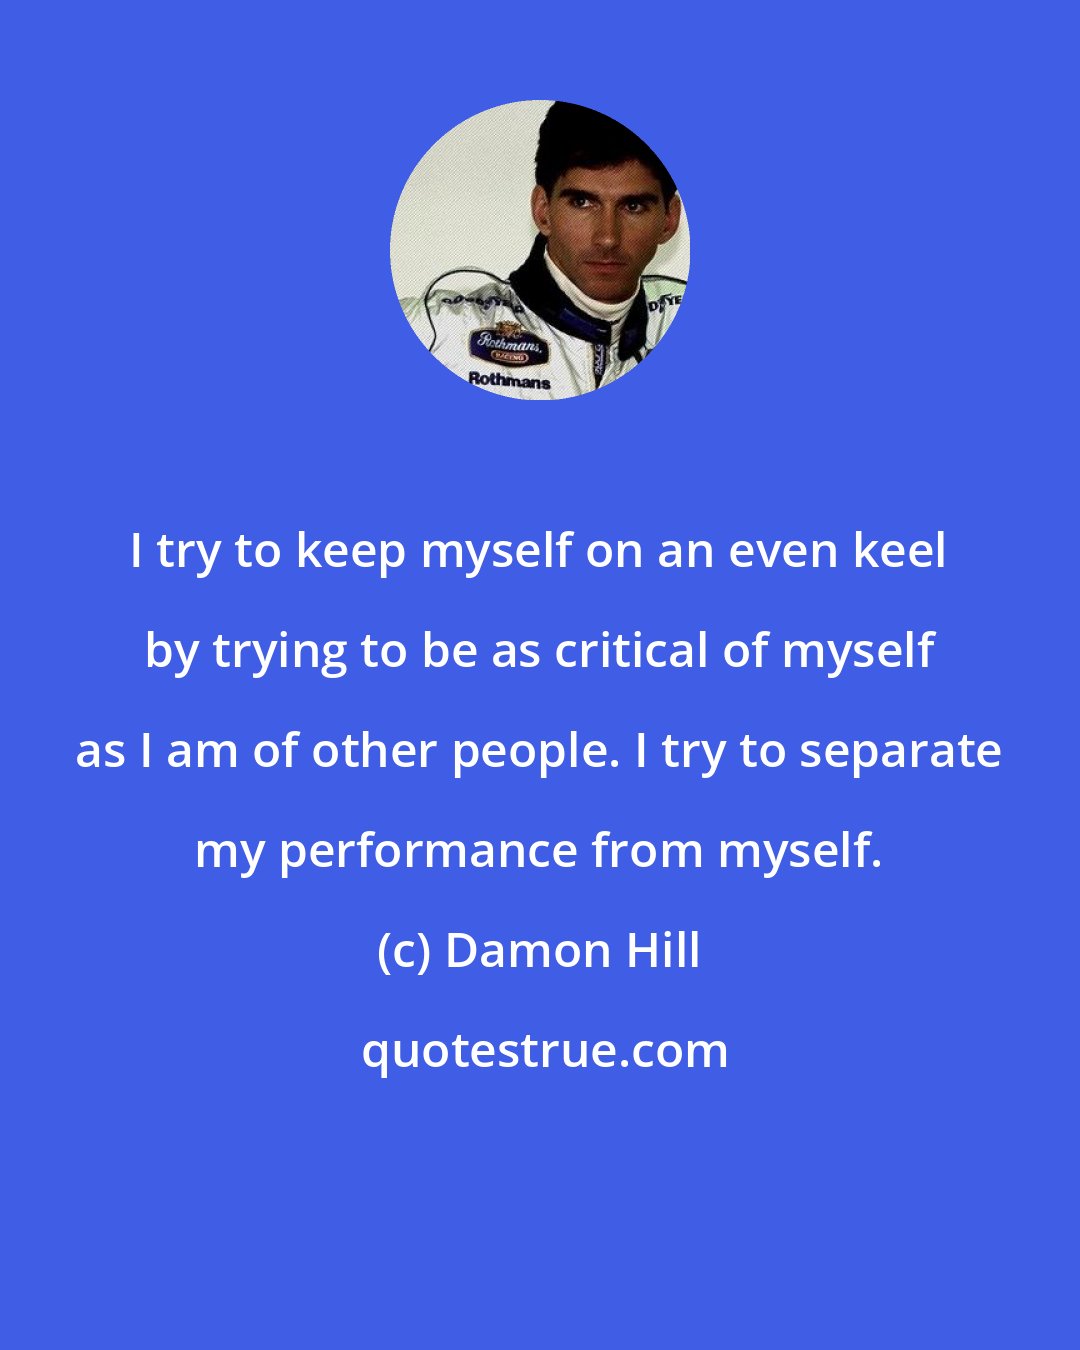 Damon Hill: I try to keep myself on an even keel by trying to be as critical of myself as I am of other people. I try to separate my performance from myself.